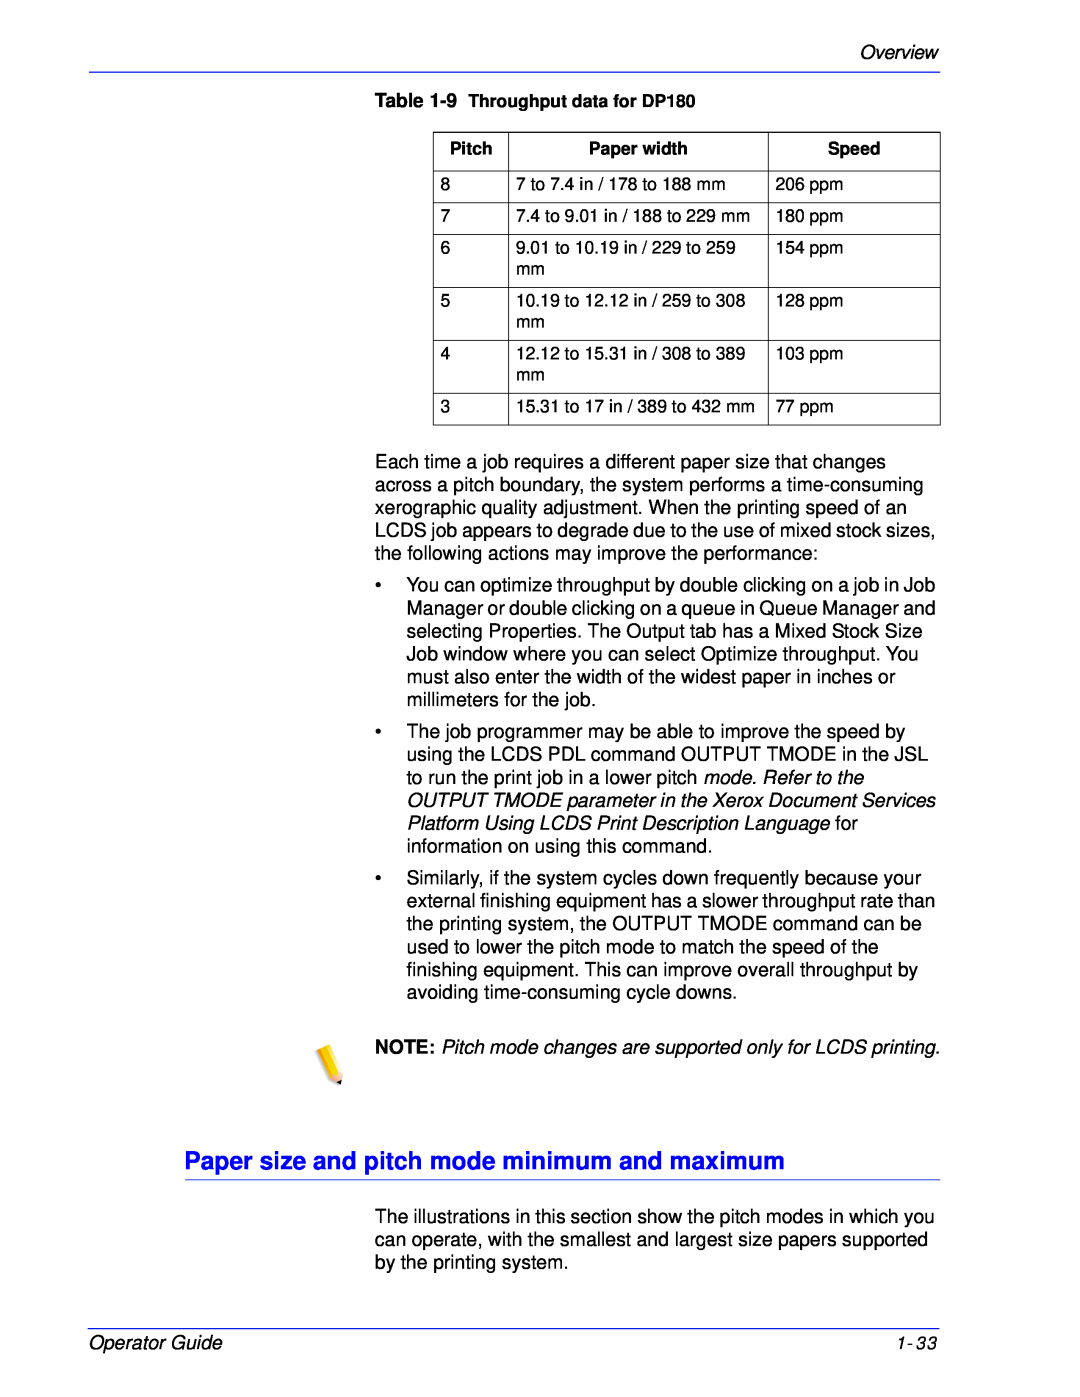 Xerox 180 EPS, 100 manual Paper size and pitch mode minimum and maximum, Overview, Operator Guide 